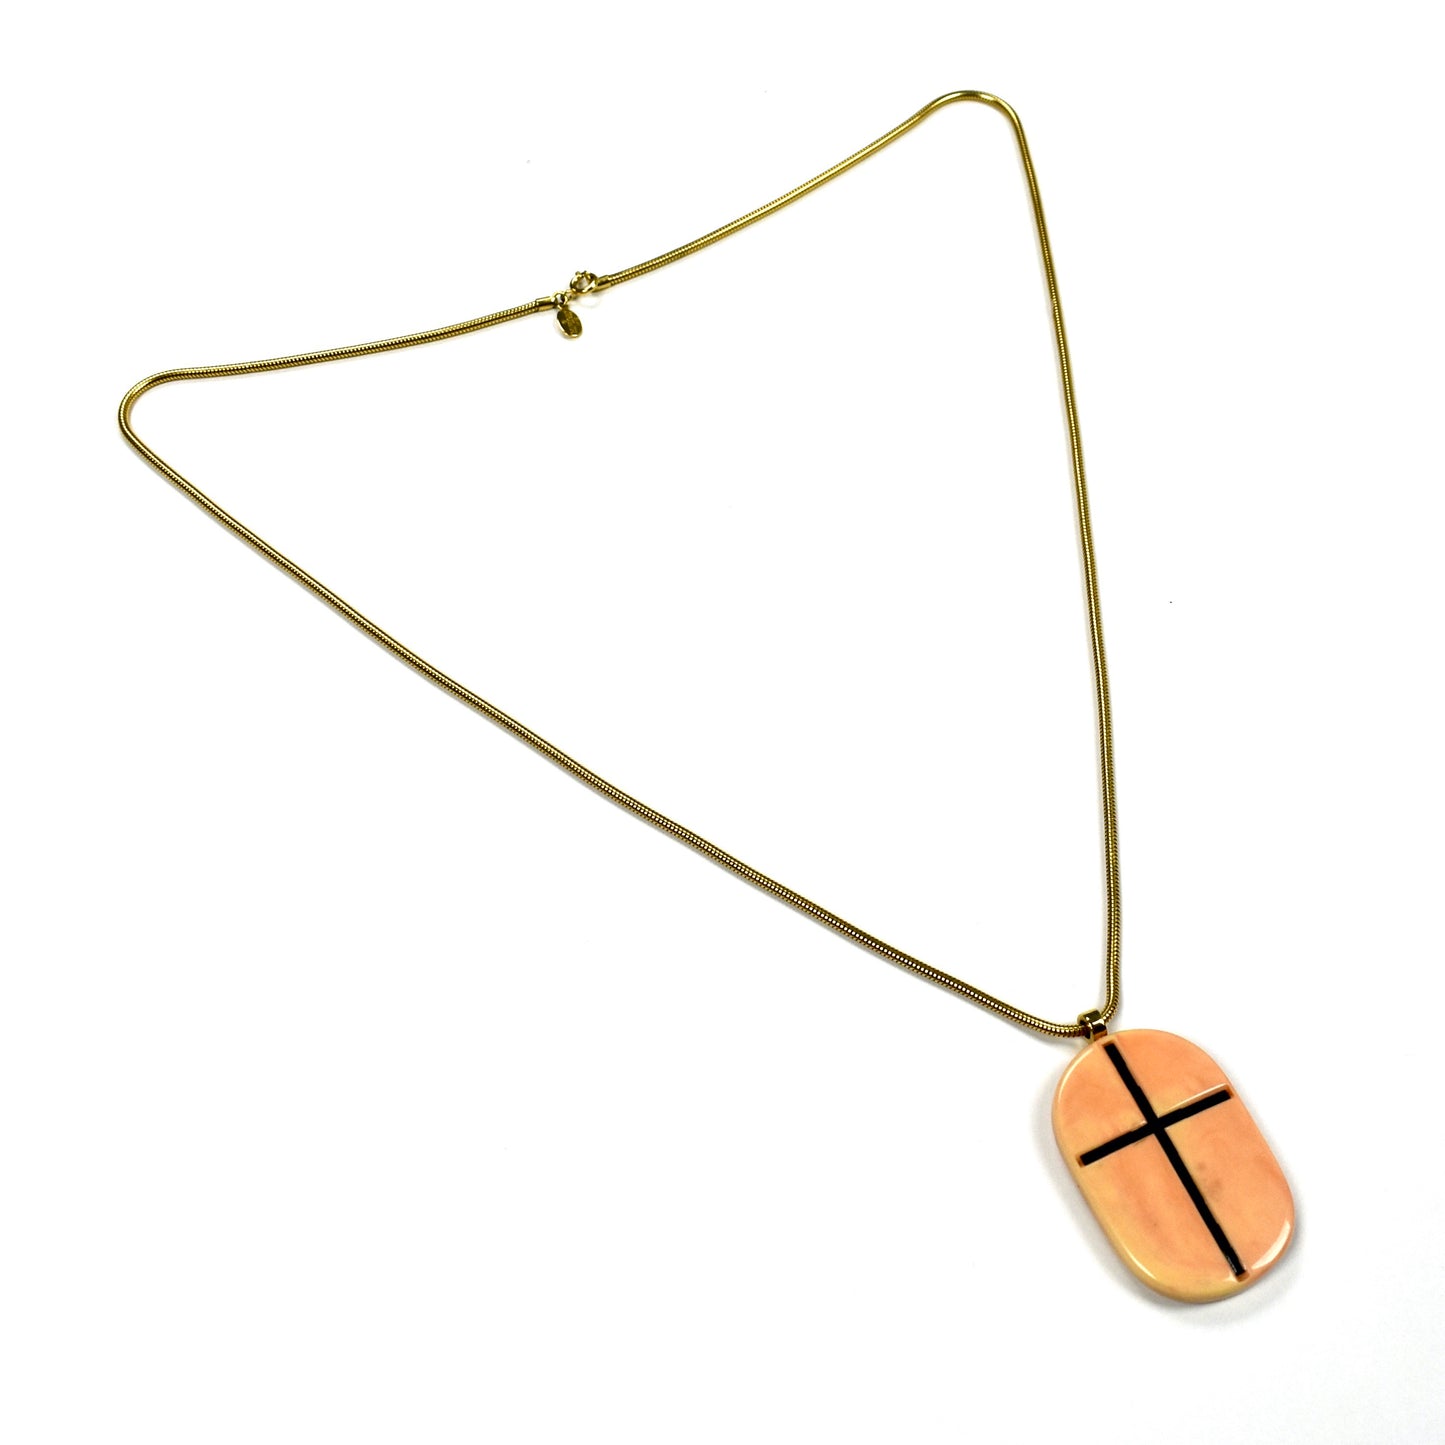 Givenchy - 1976 Runway Faux Ivory Cross Pendant Necklace